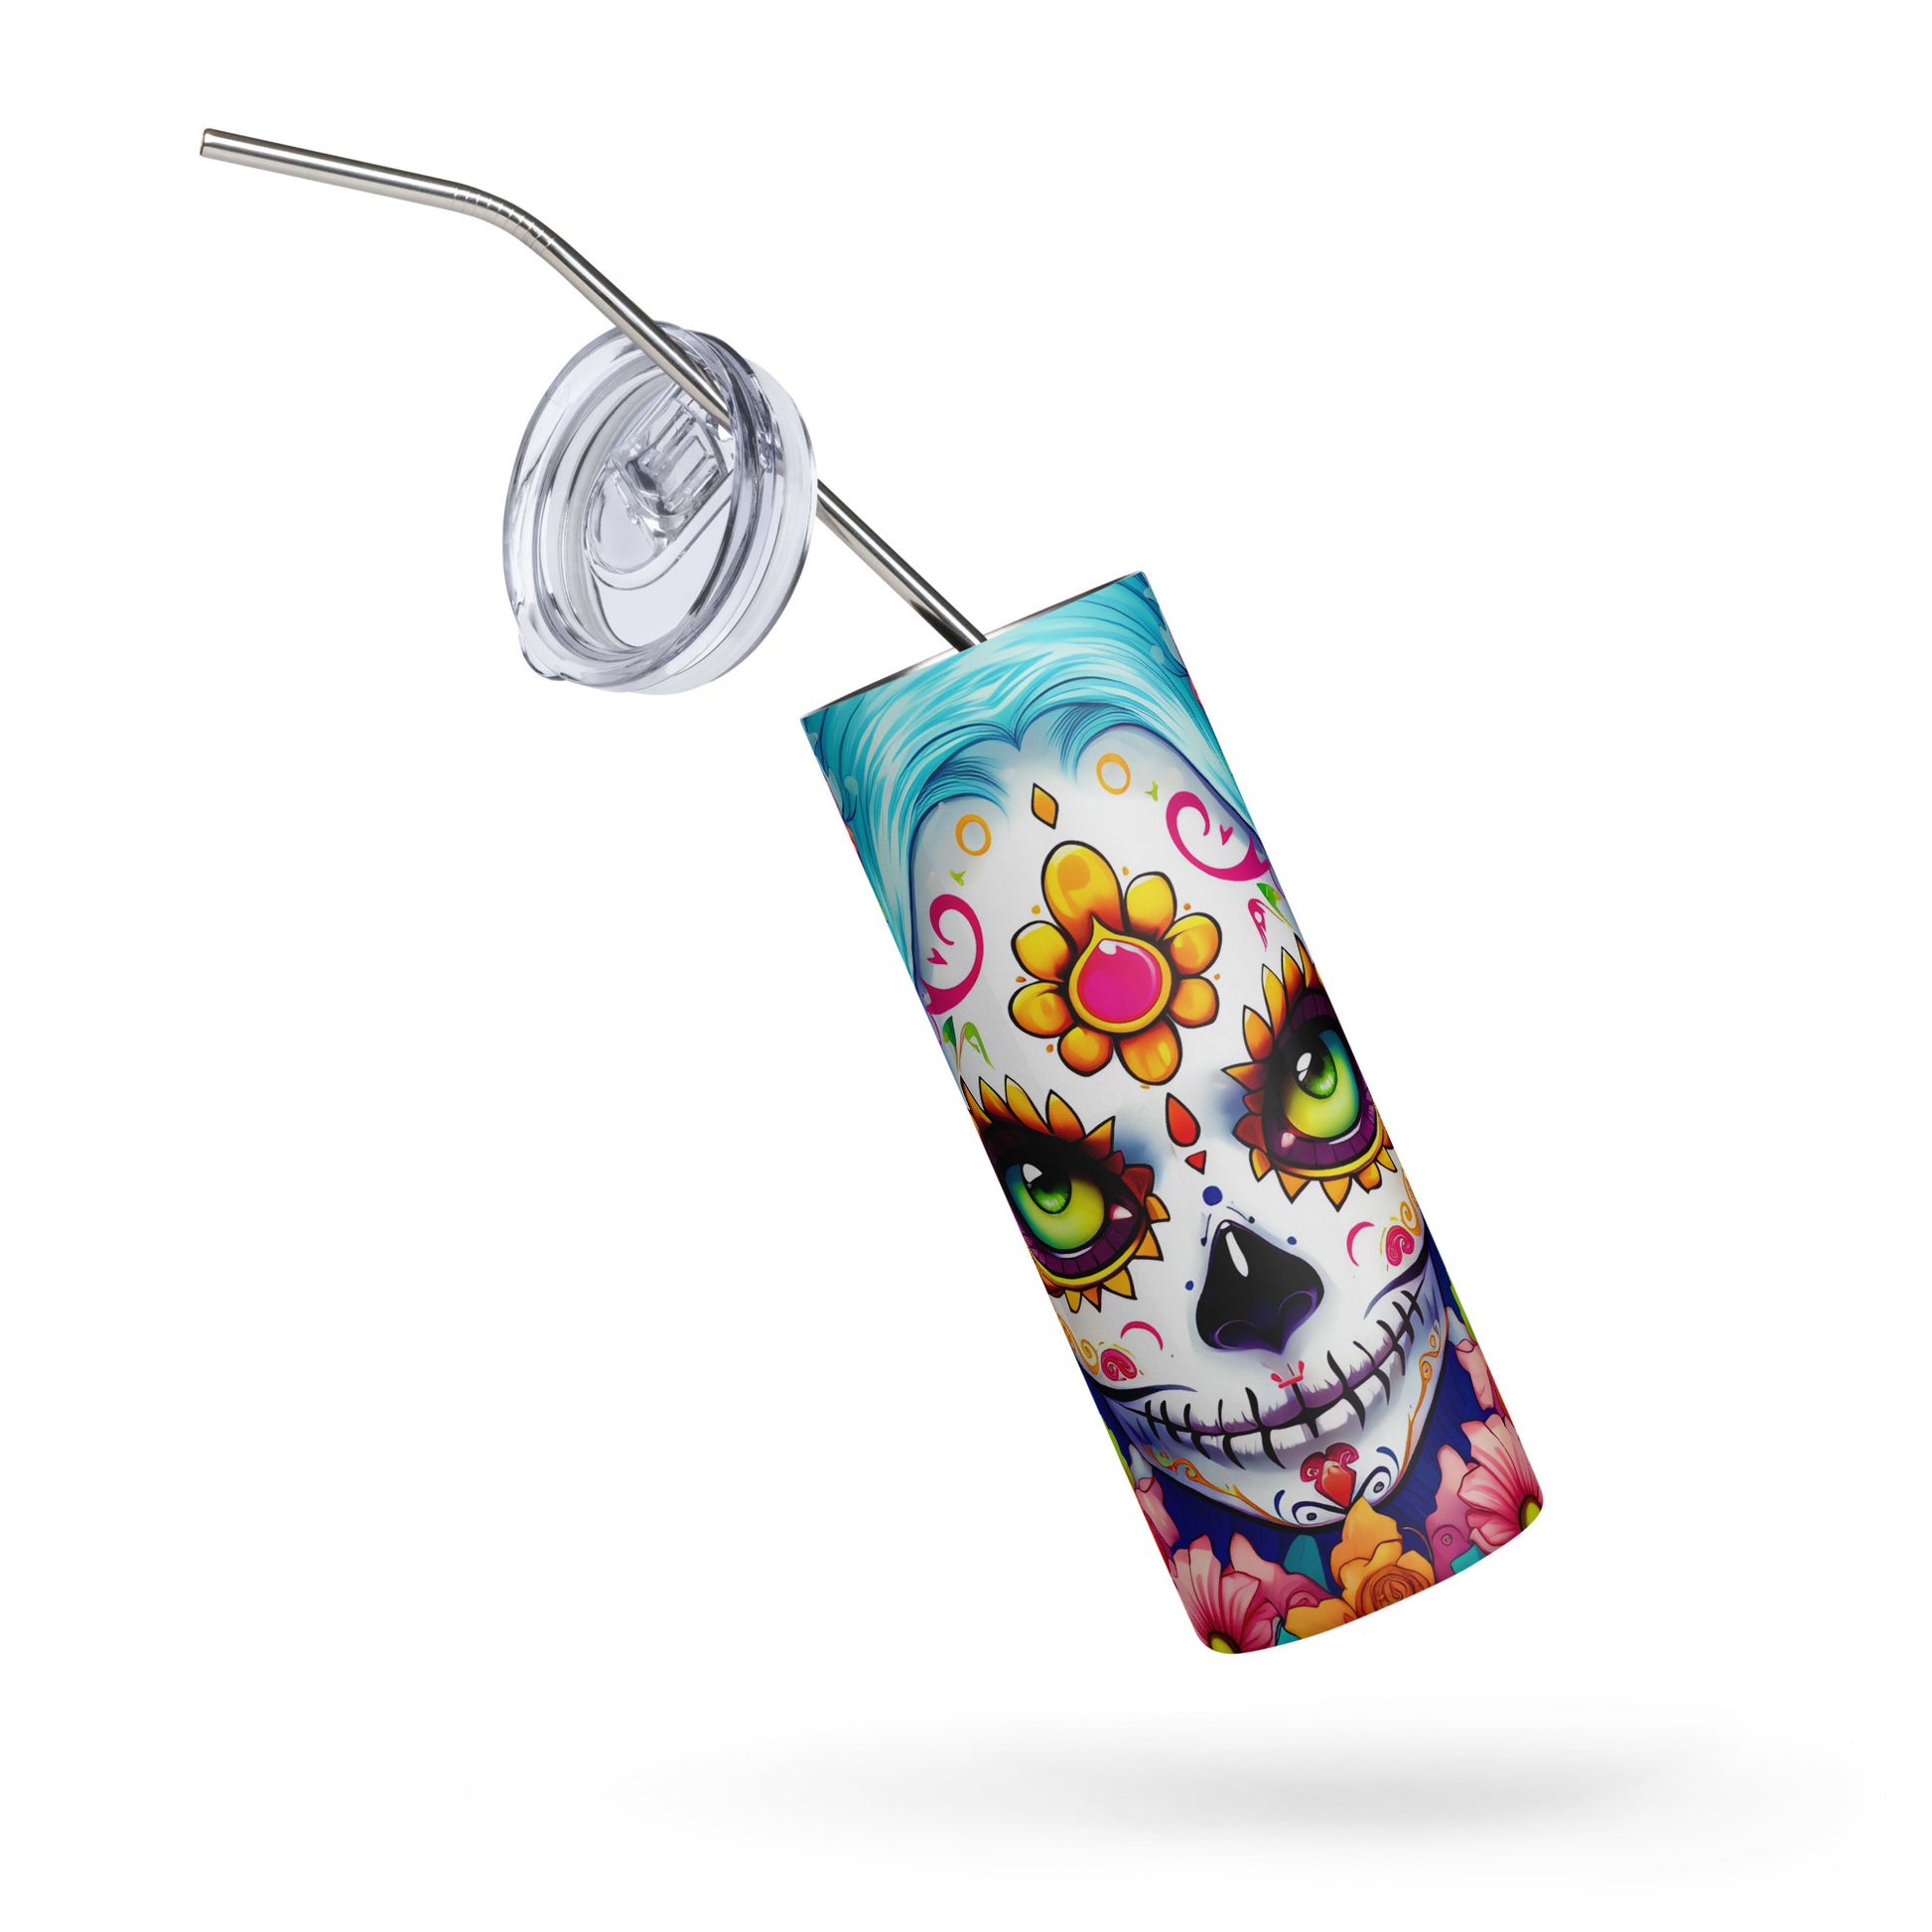 Day of the Dead Sugar Skull 04 Stainless steel tumbler CedarHill Country Market